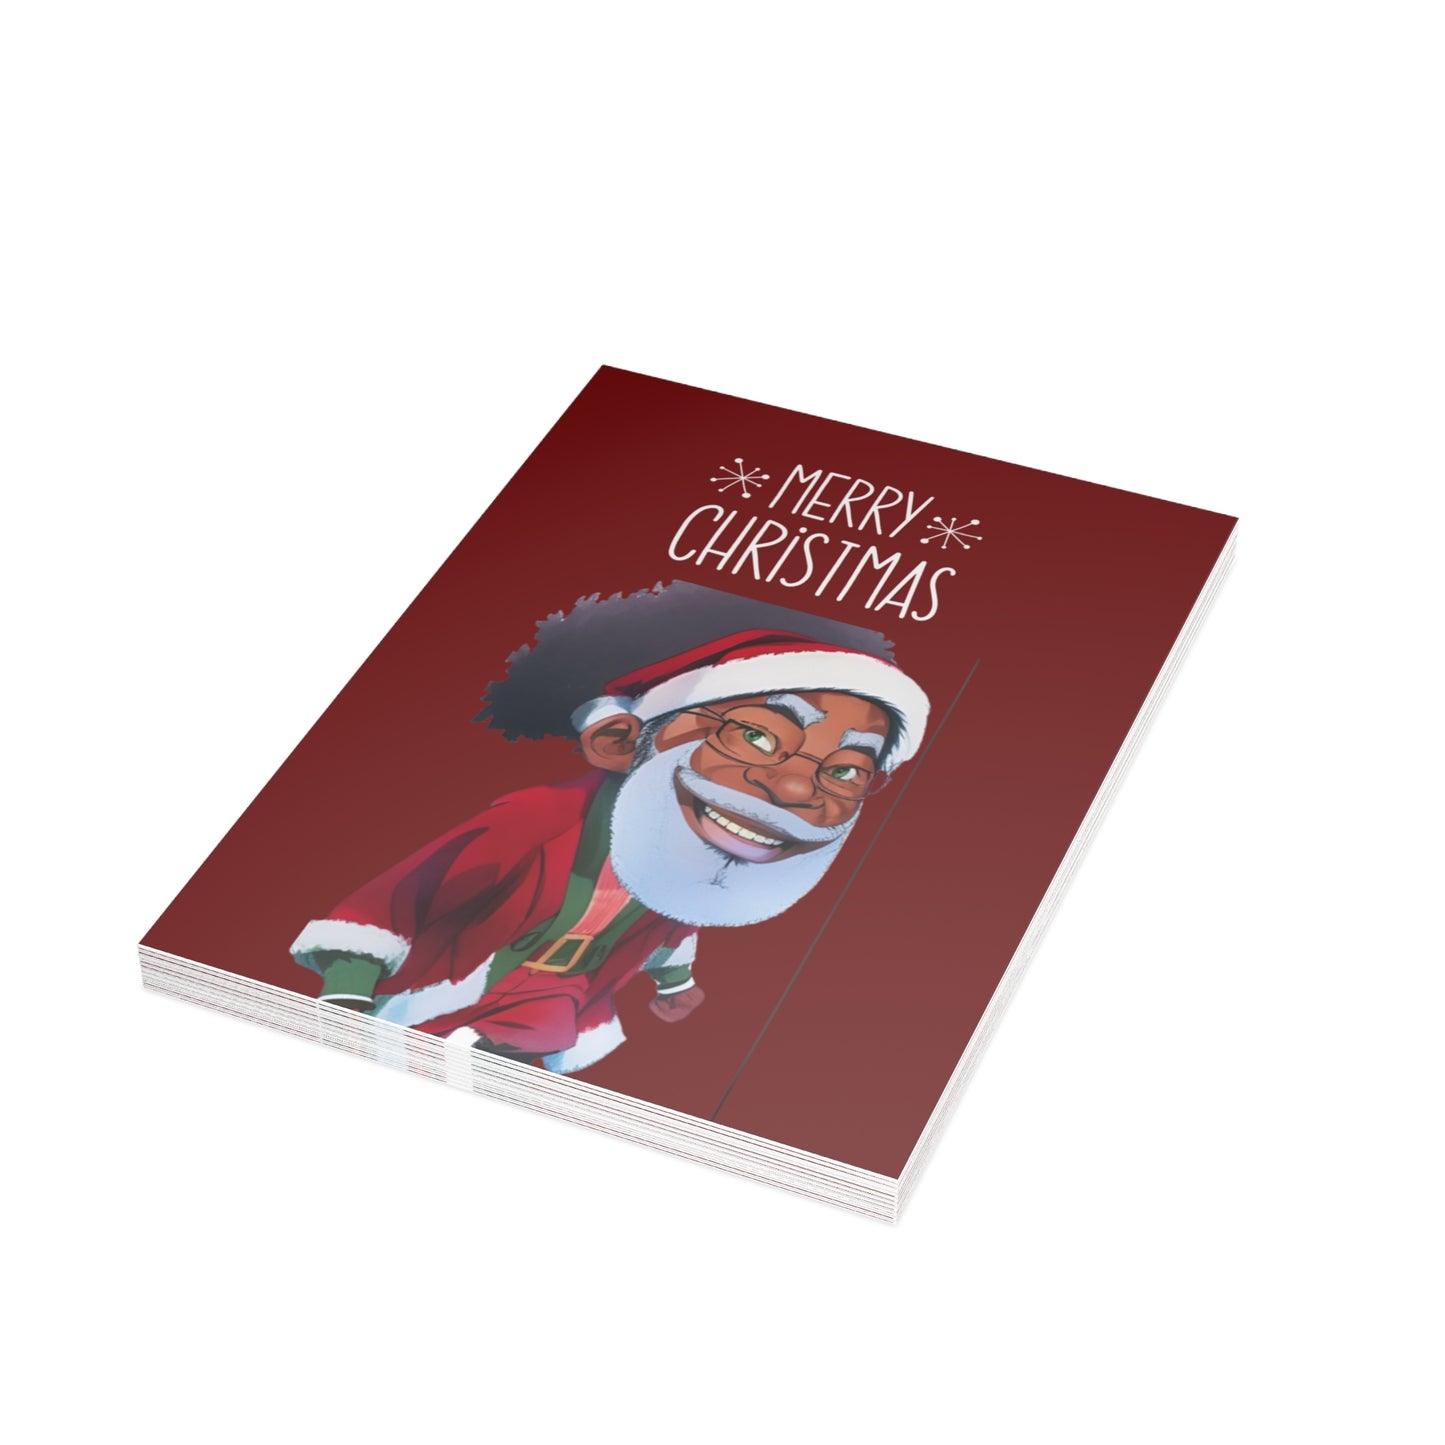 Merry Christmas Greeting Cards (1, 10, 30, and 50pcs)